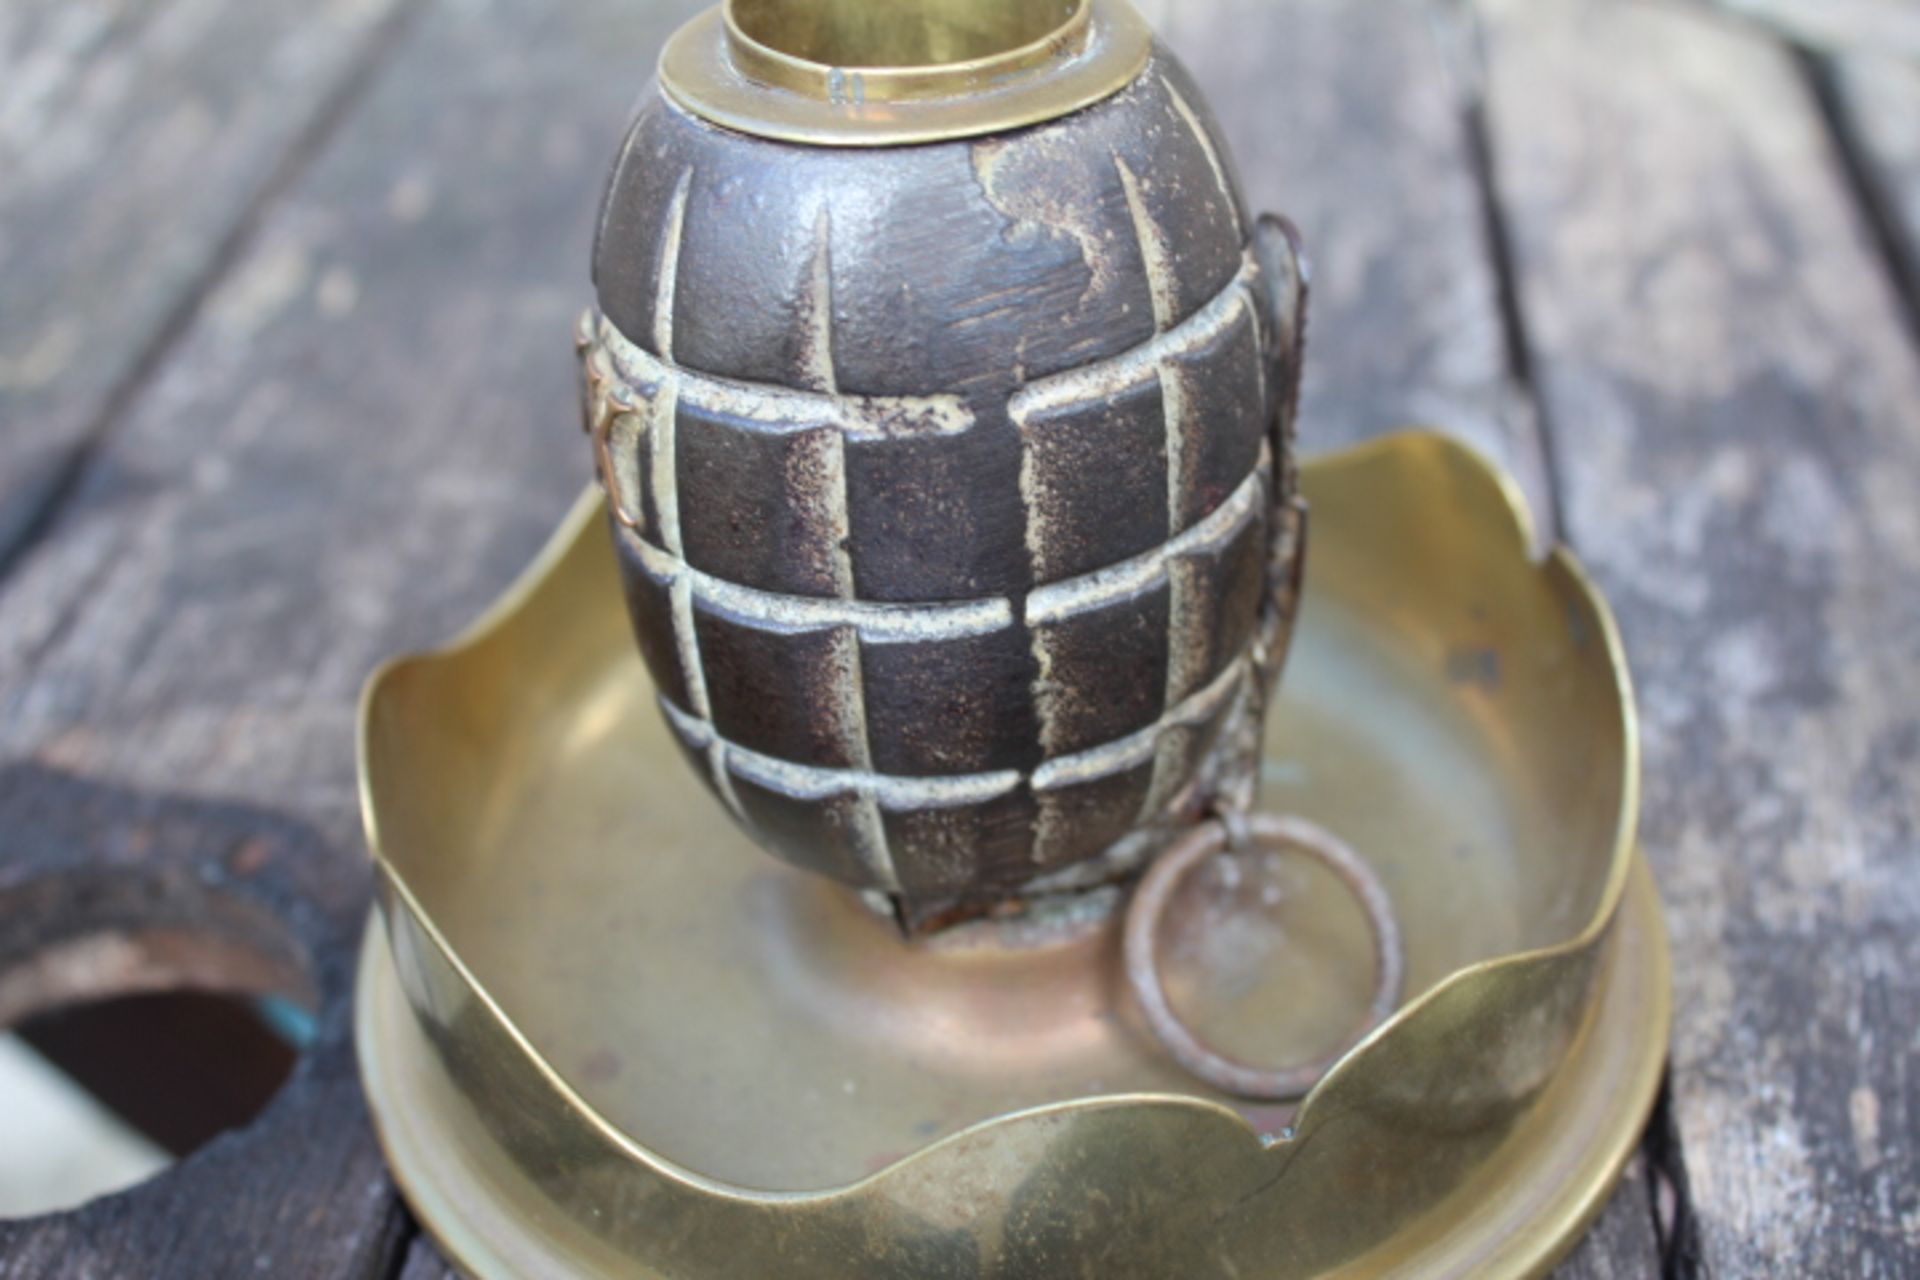 British military trench art. WW1/WW2 Mills Grenade mounted on a 45 Howser mark 2. The grenade has